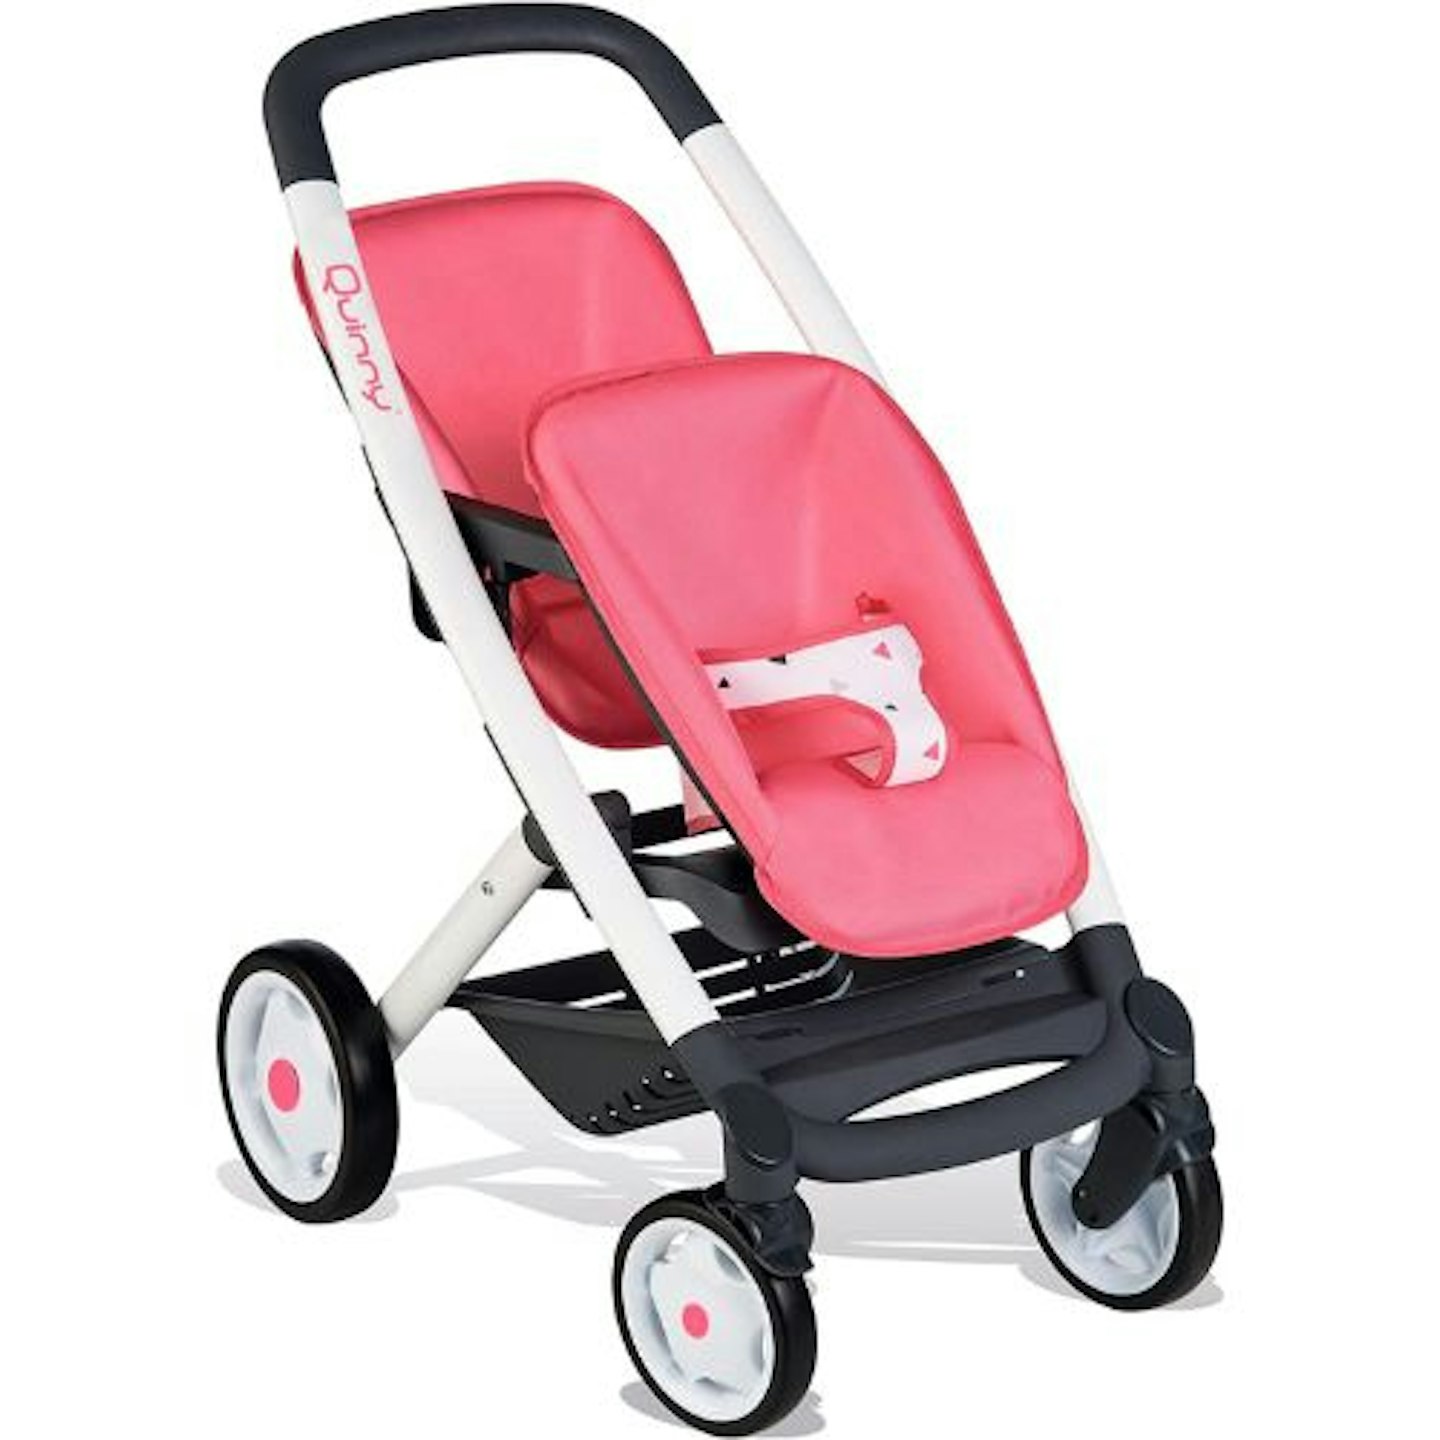 Smoby 253298 Pink Wheel Maxi-COSI & Quinny Twin Pushchair